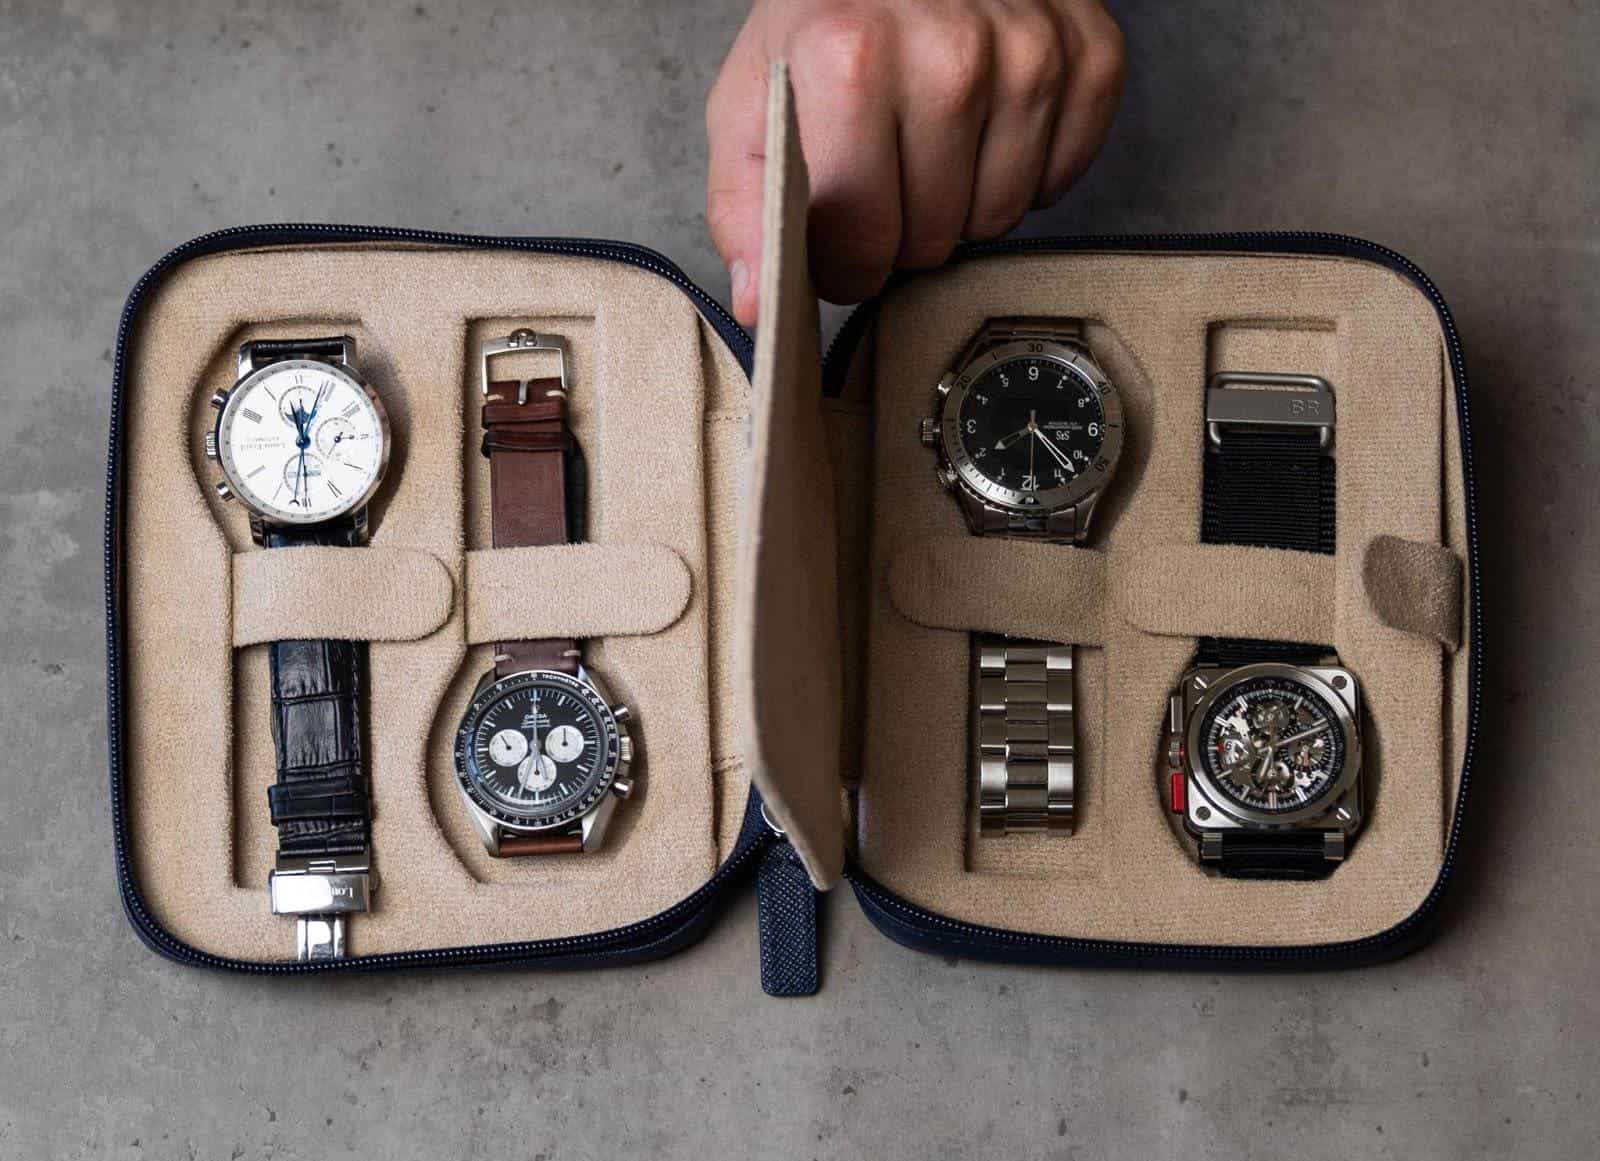 The Watch Case: Find the Perfect Watch Storage Solution for Your Watch Collection